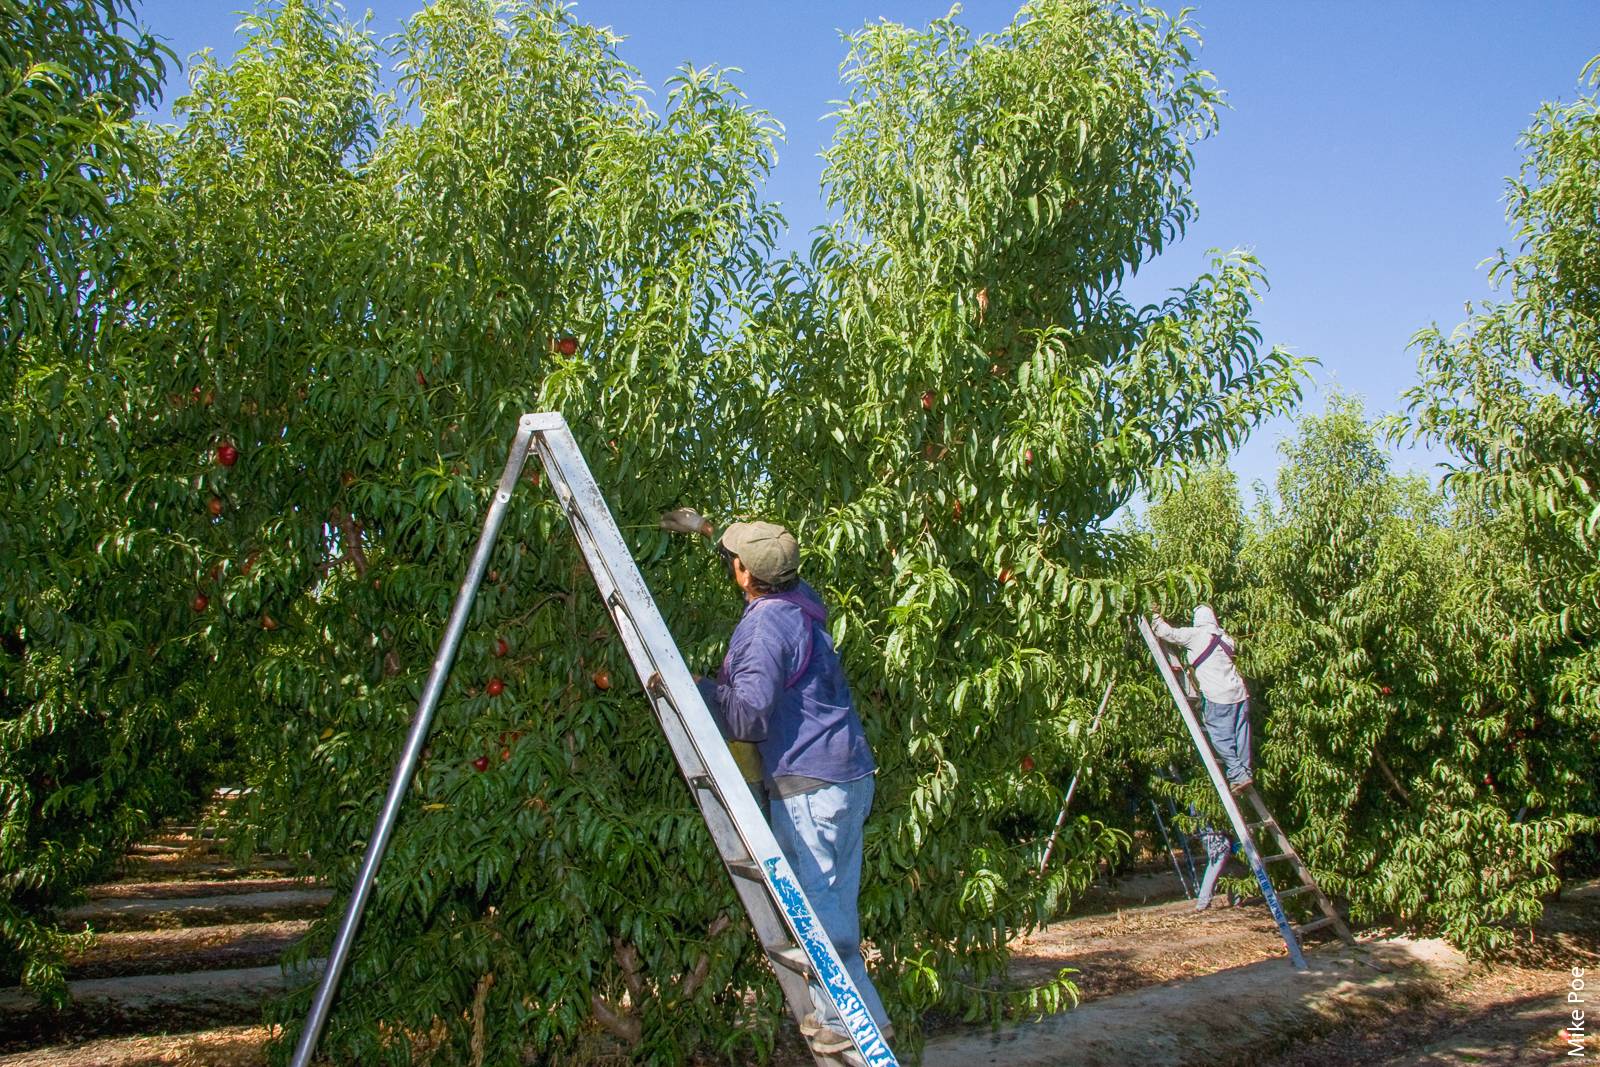 In 2014, the average earnings for workers in the fruit and tree nut farming sector were $17,600.